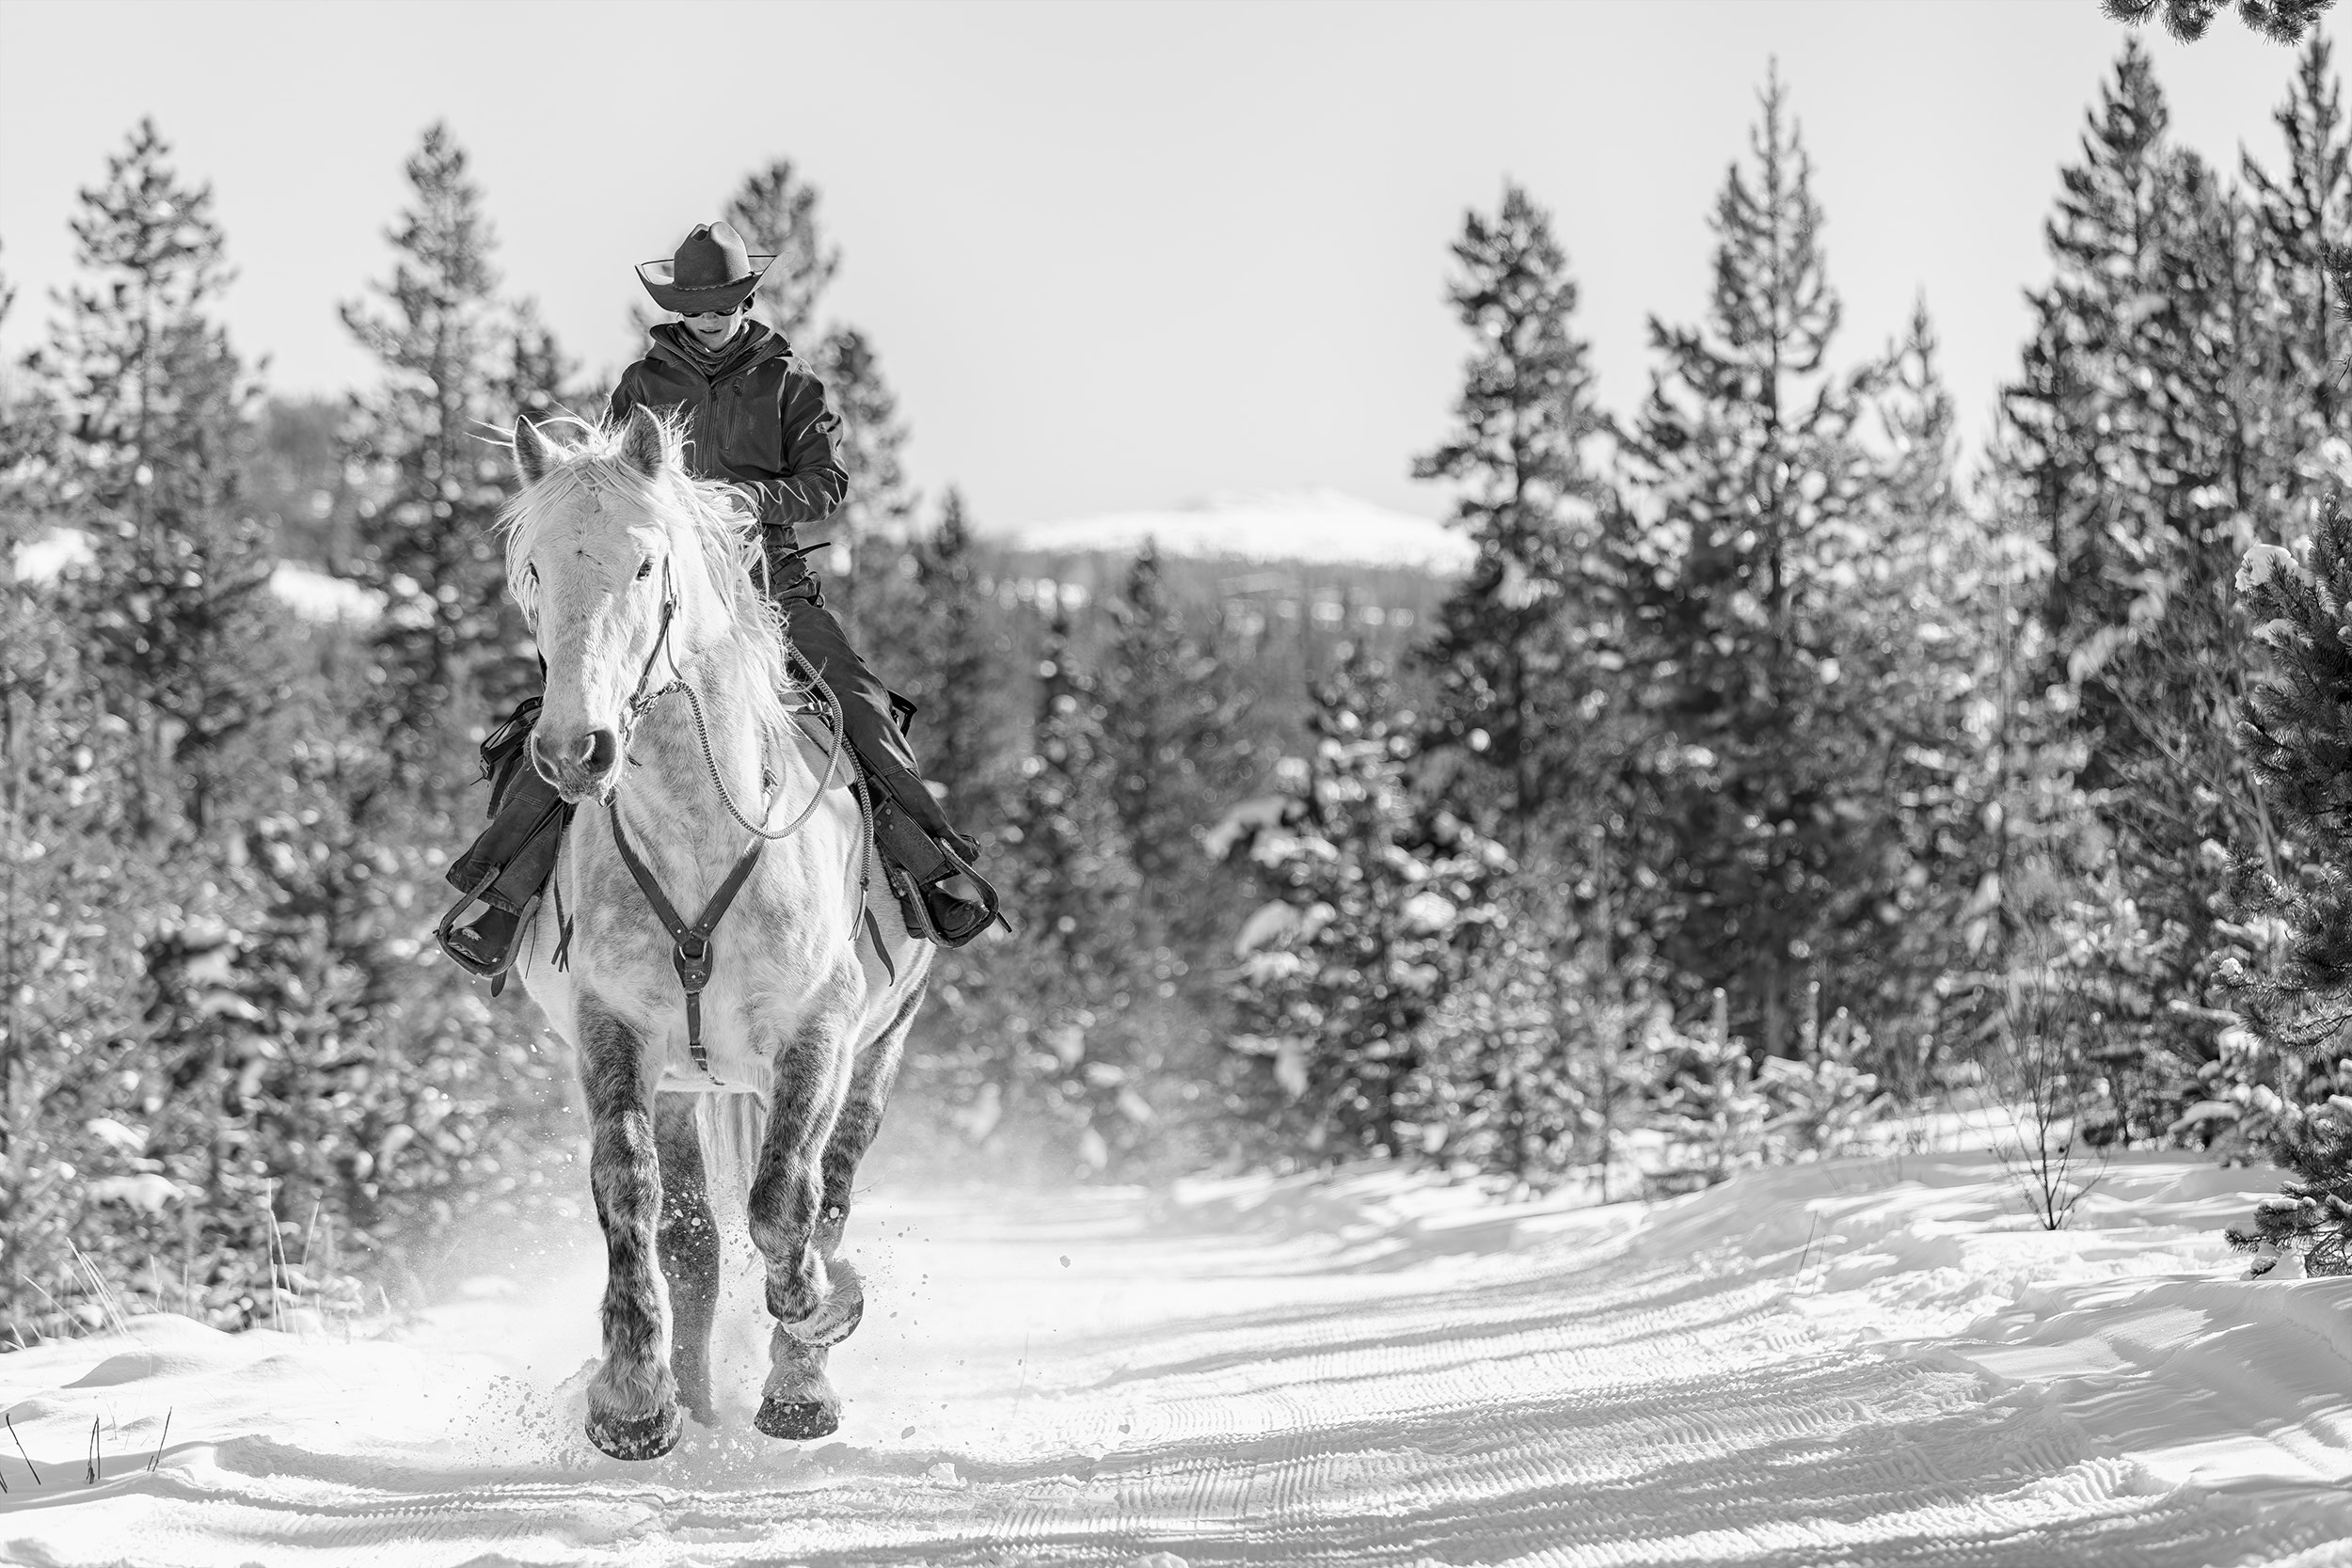  Black and white photo of a Cowgirl riding horse thru the snow in woods. Agriculture and livestock photography.